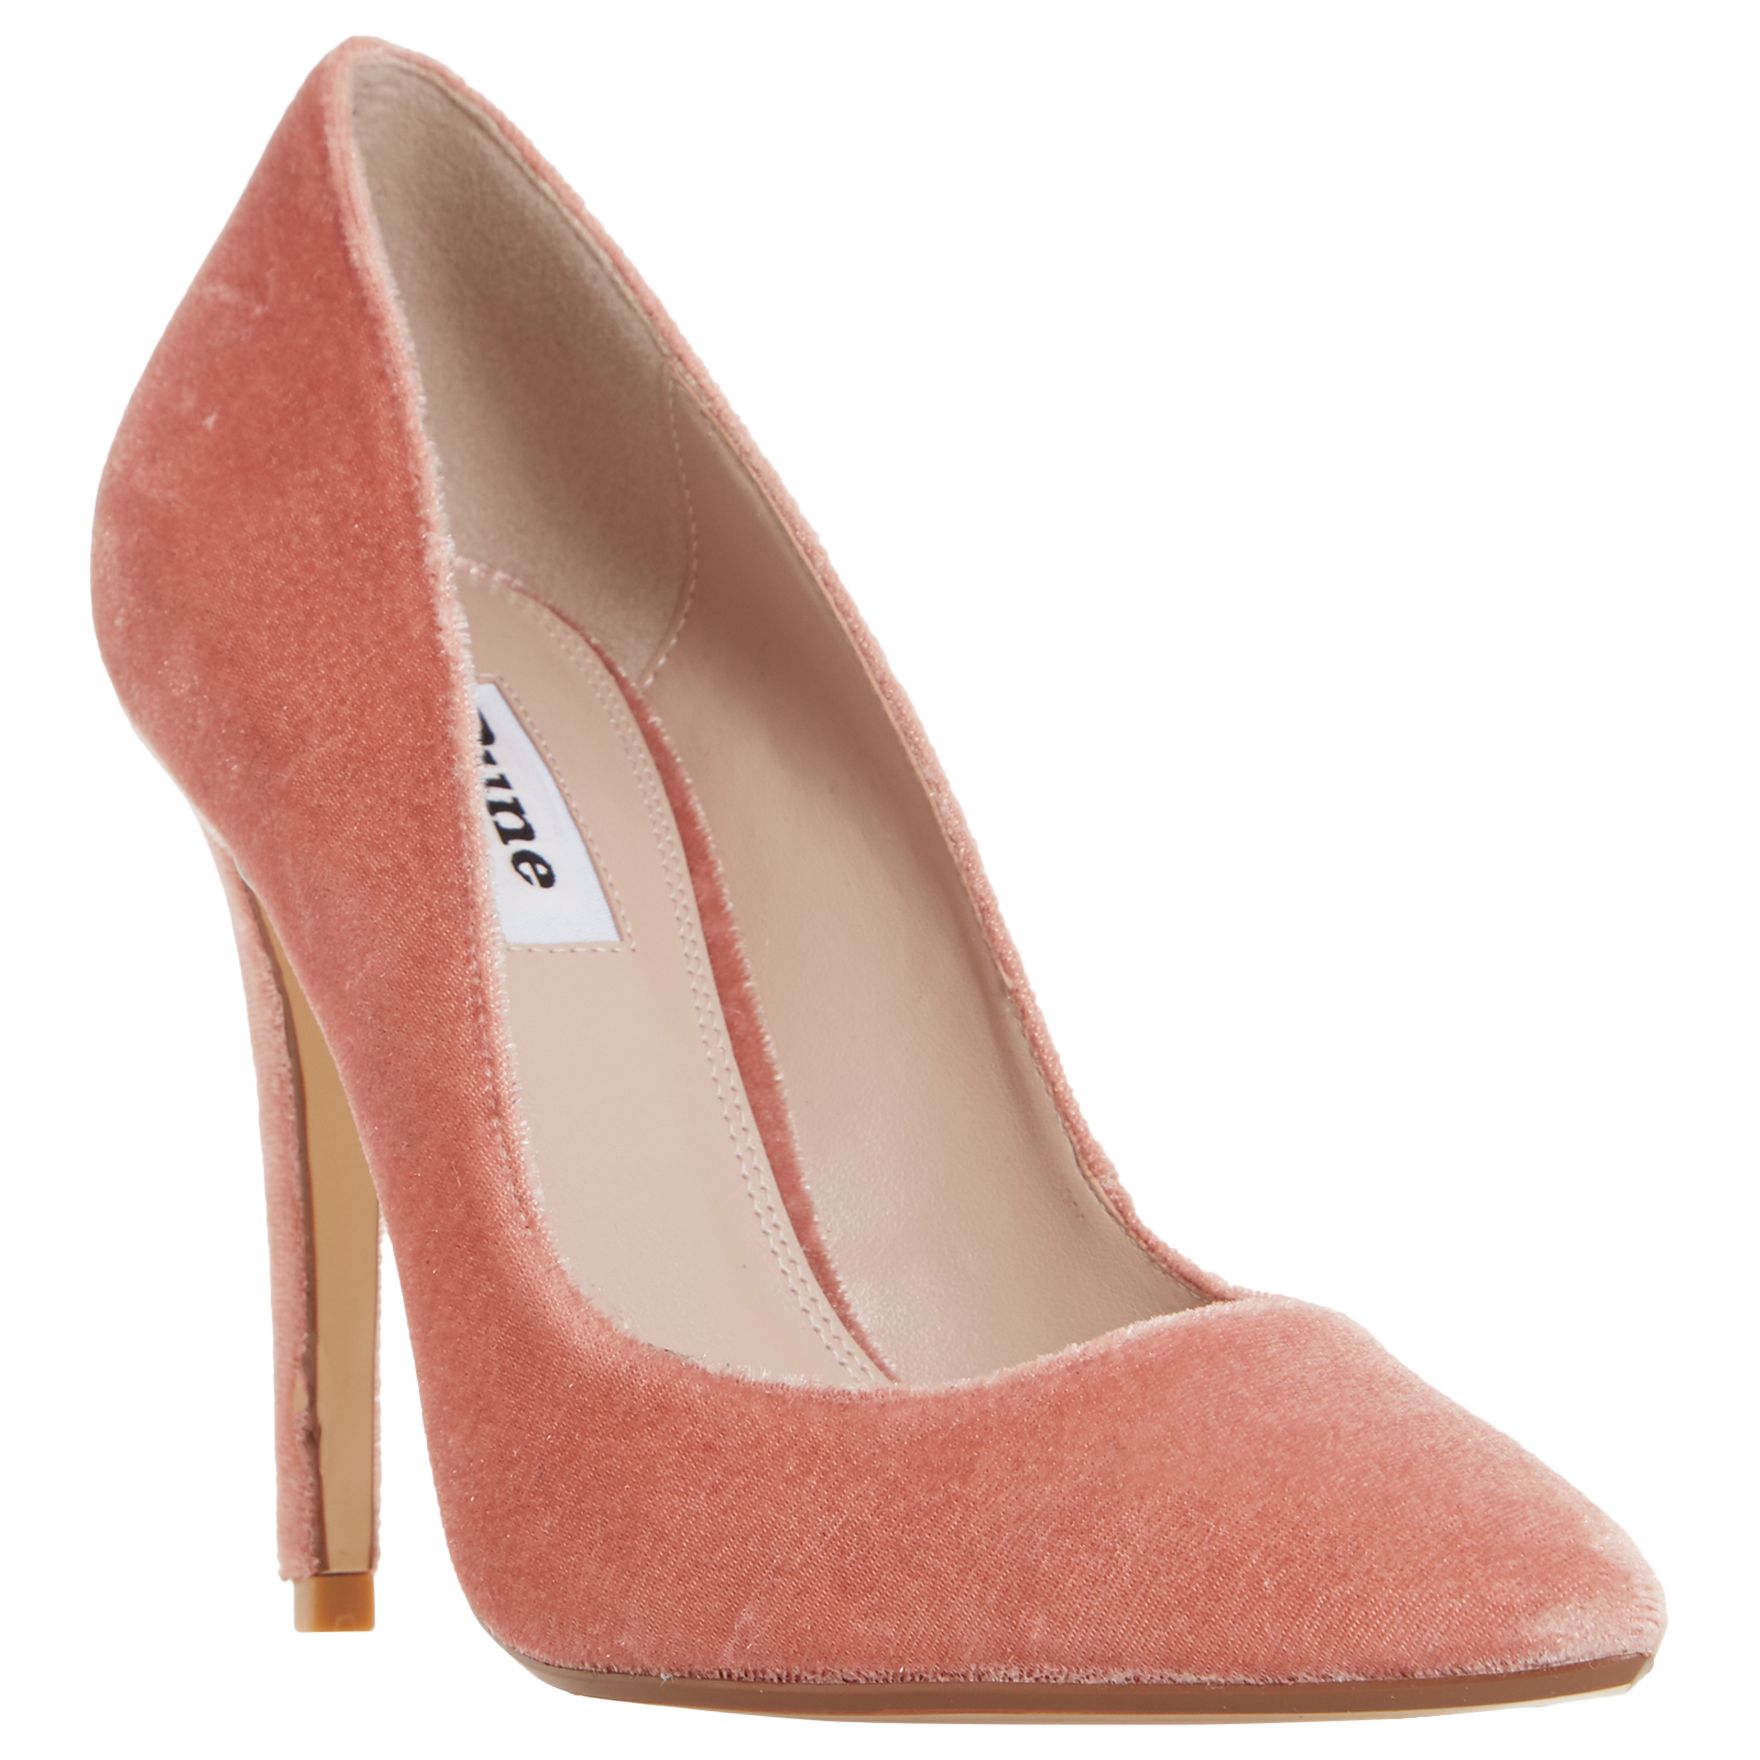 Dune Aiyana Pointed Toe Court Shoes, Blush, 6